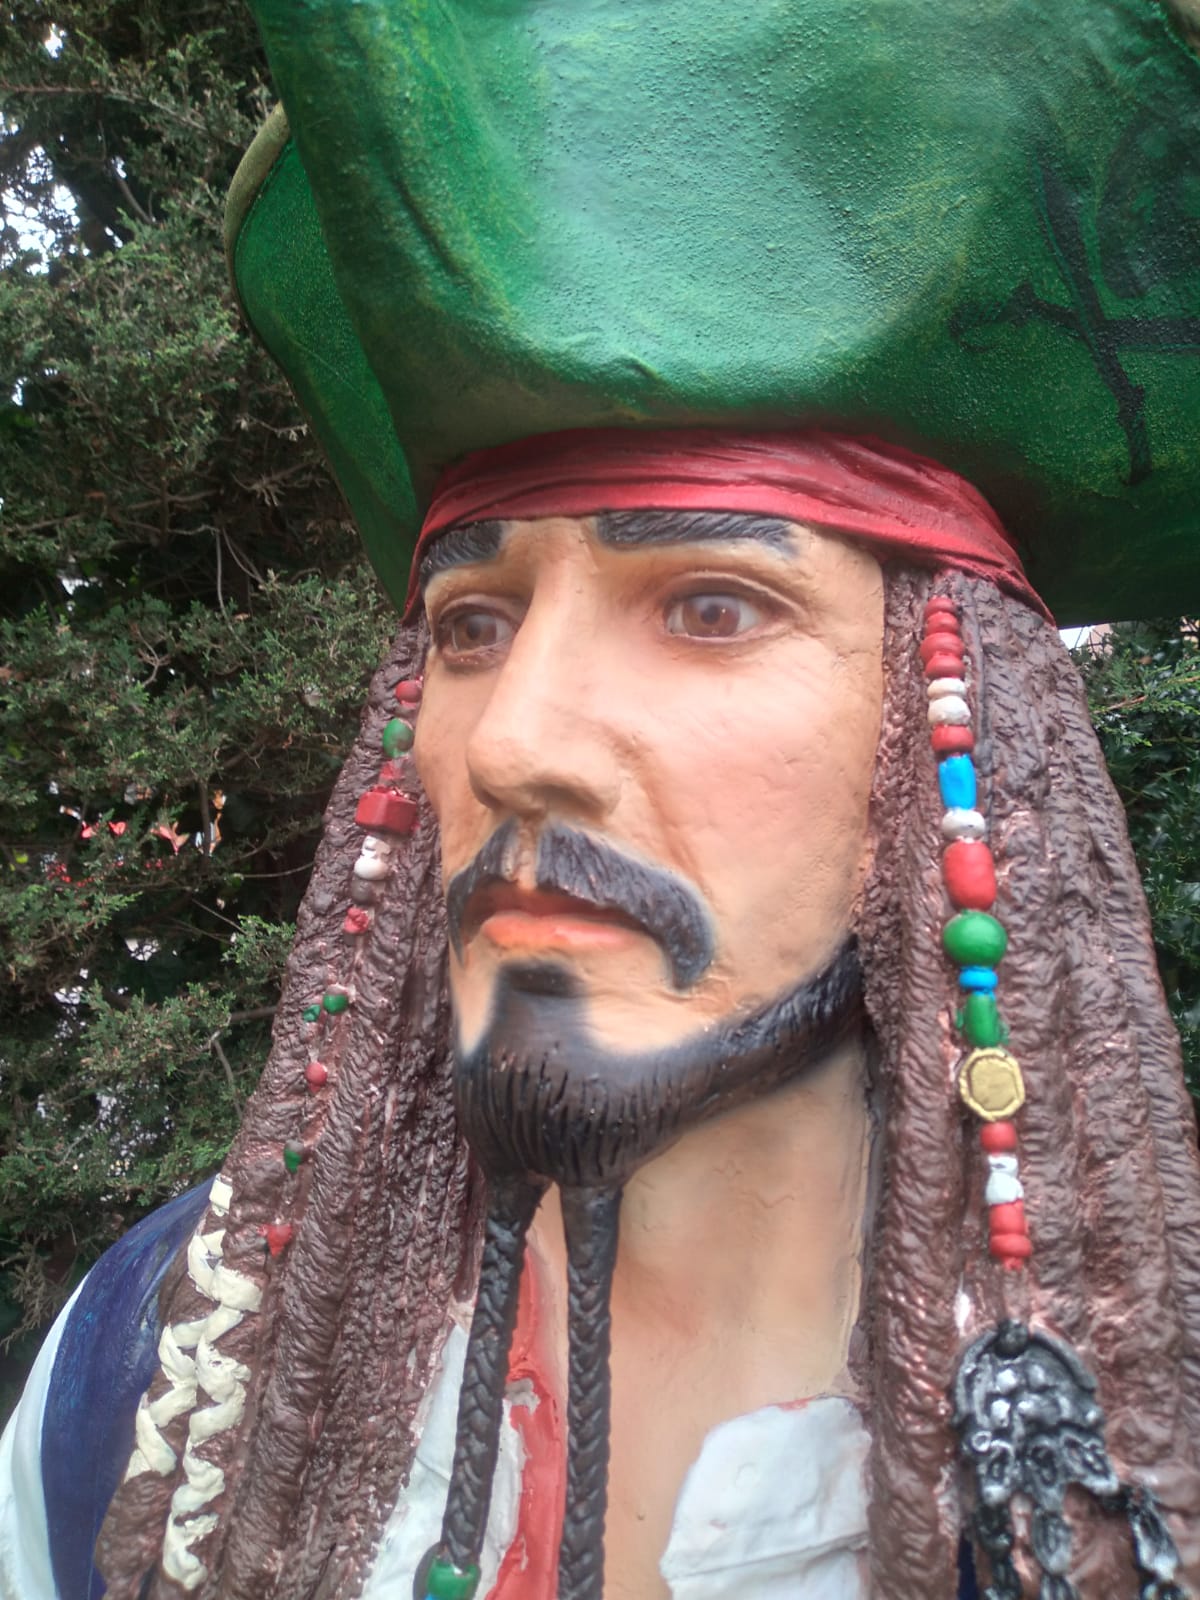 WITHDRAWN DUE TO DAMAGE IN TRANSIT Cinema - Statue of the Caribbean pirate Jack Sparr - Image 6 of 11